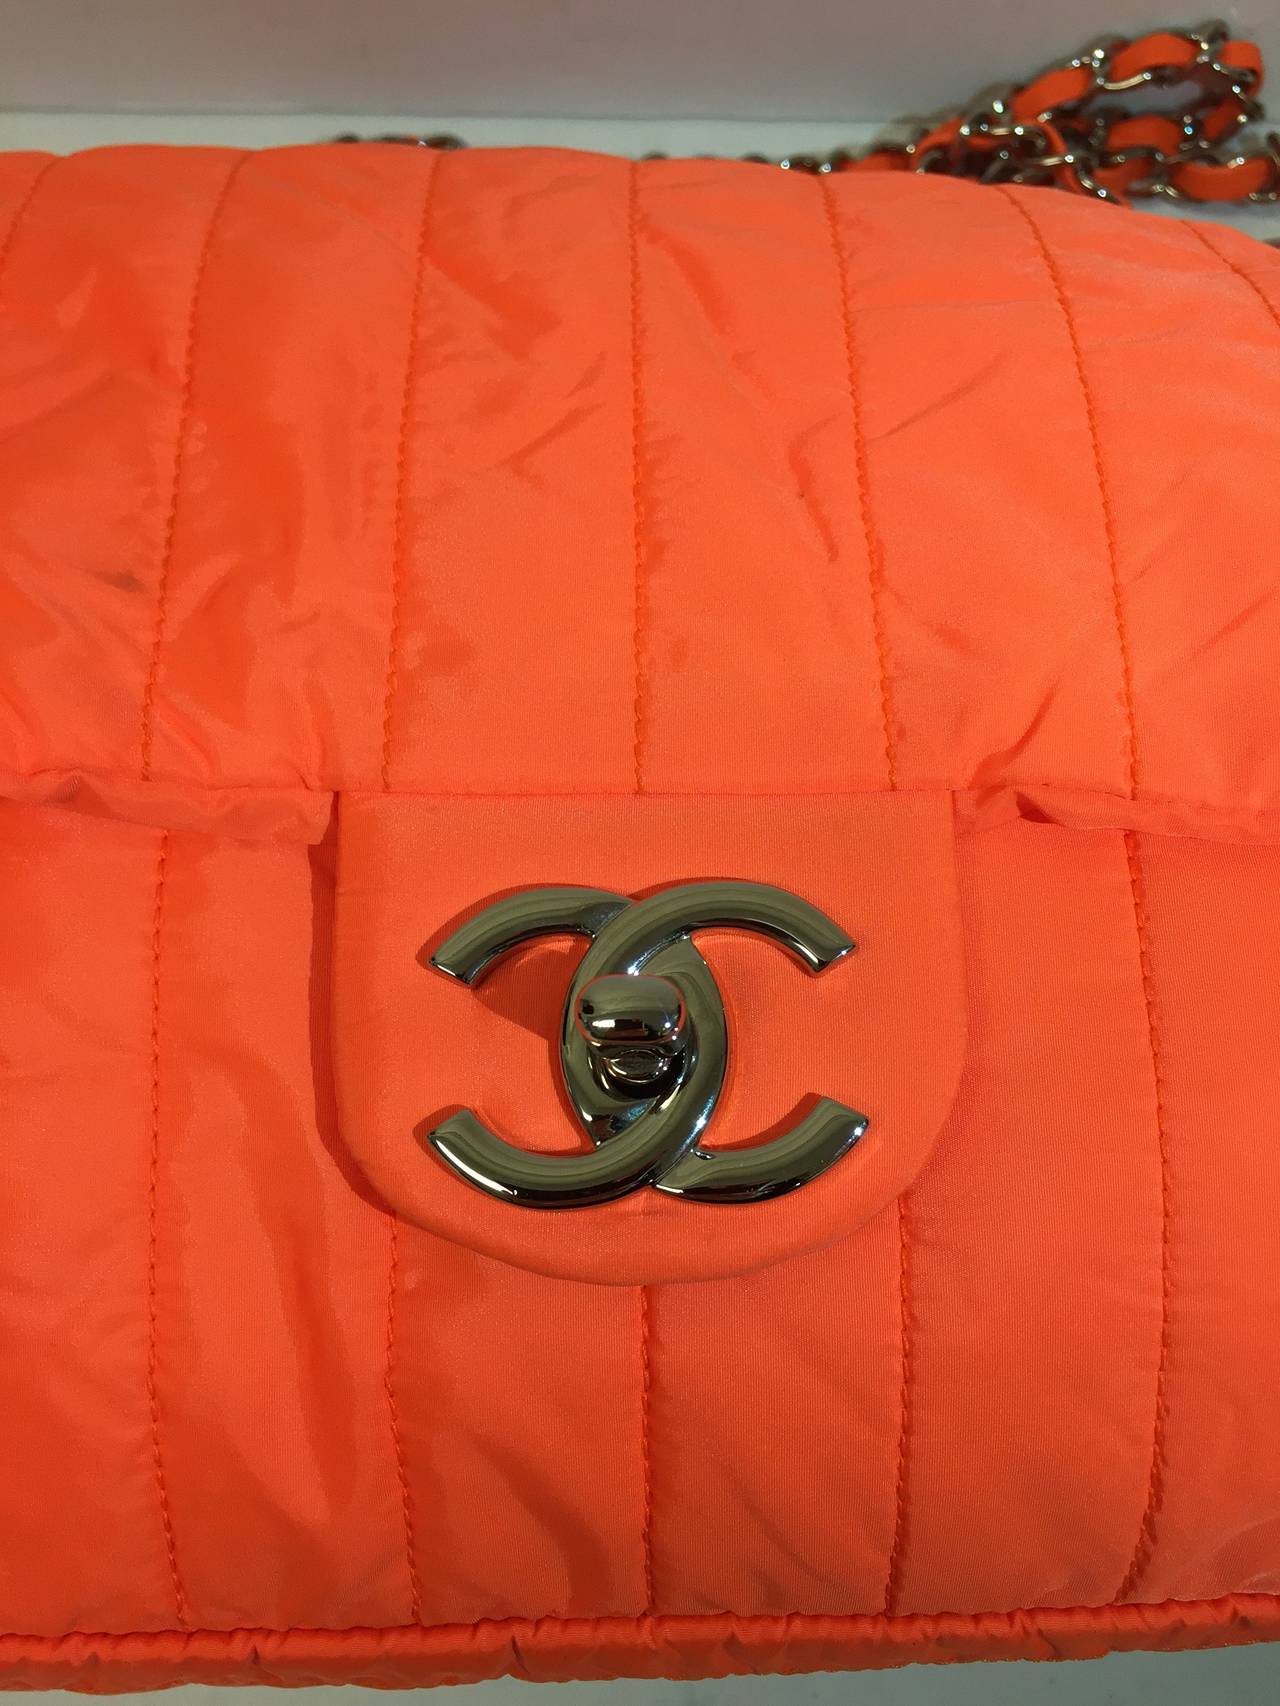 This is an authentic CHANEL Nylon Vertical Quilted Jumbo Flap in neon orange. This relaxed flap bag is made of a casual nylon material with a unique vertical quilting, and is crafted in the classic flap bag structure. The handles are made of leather